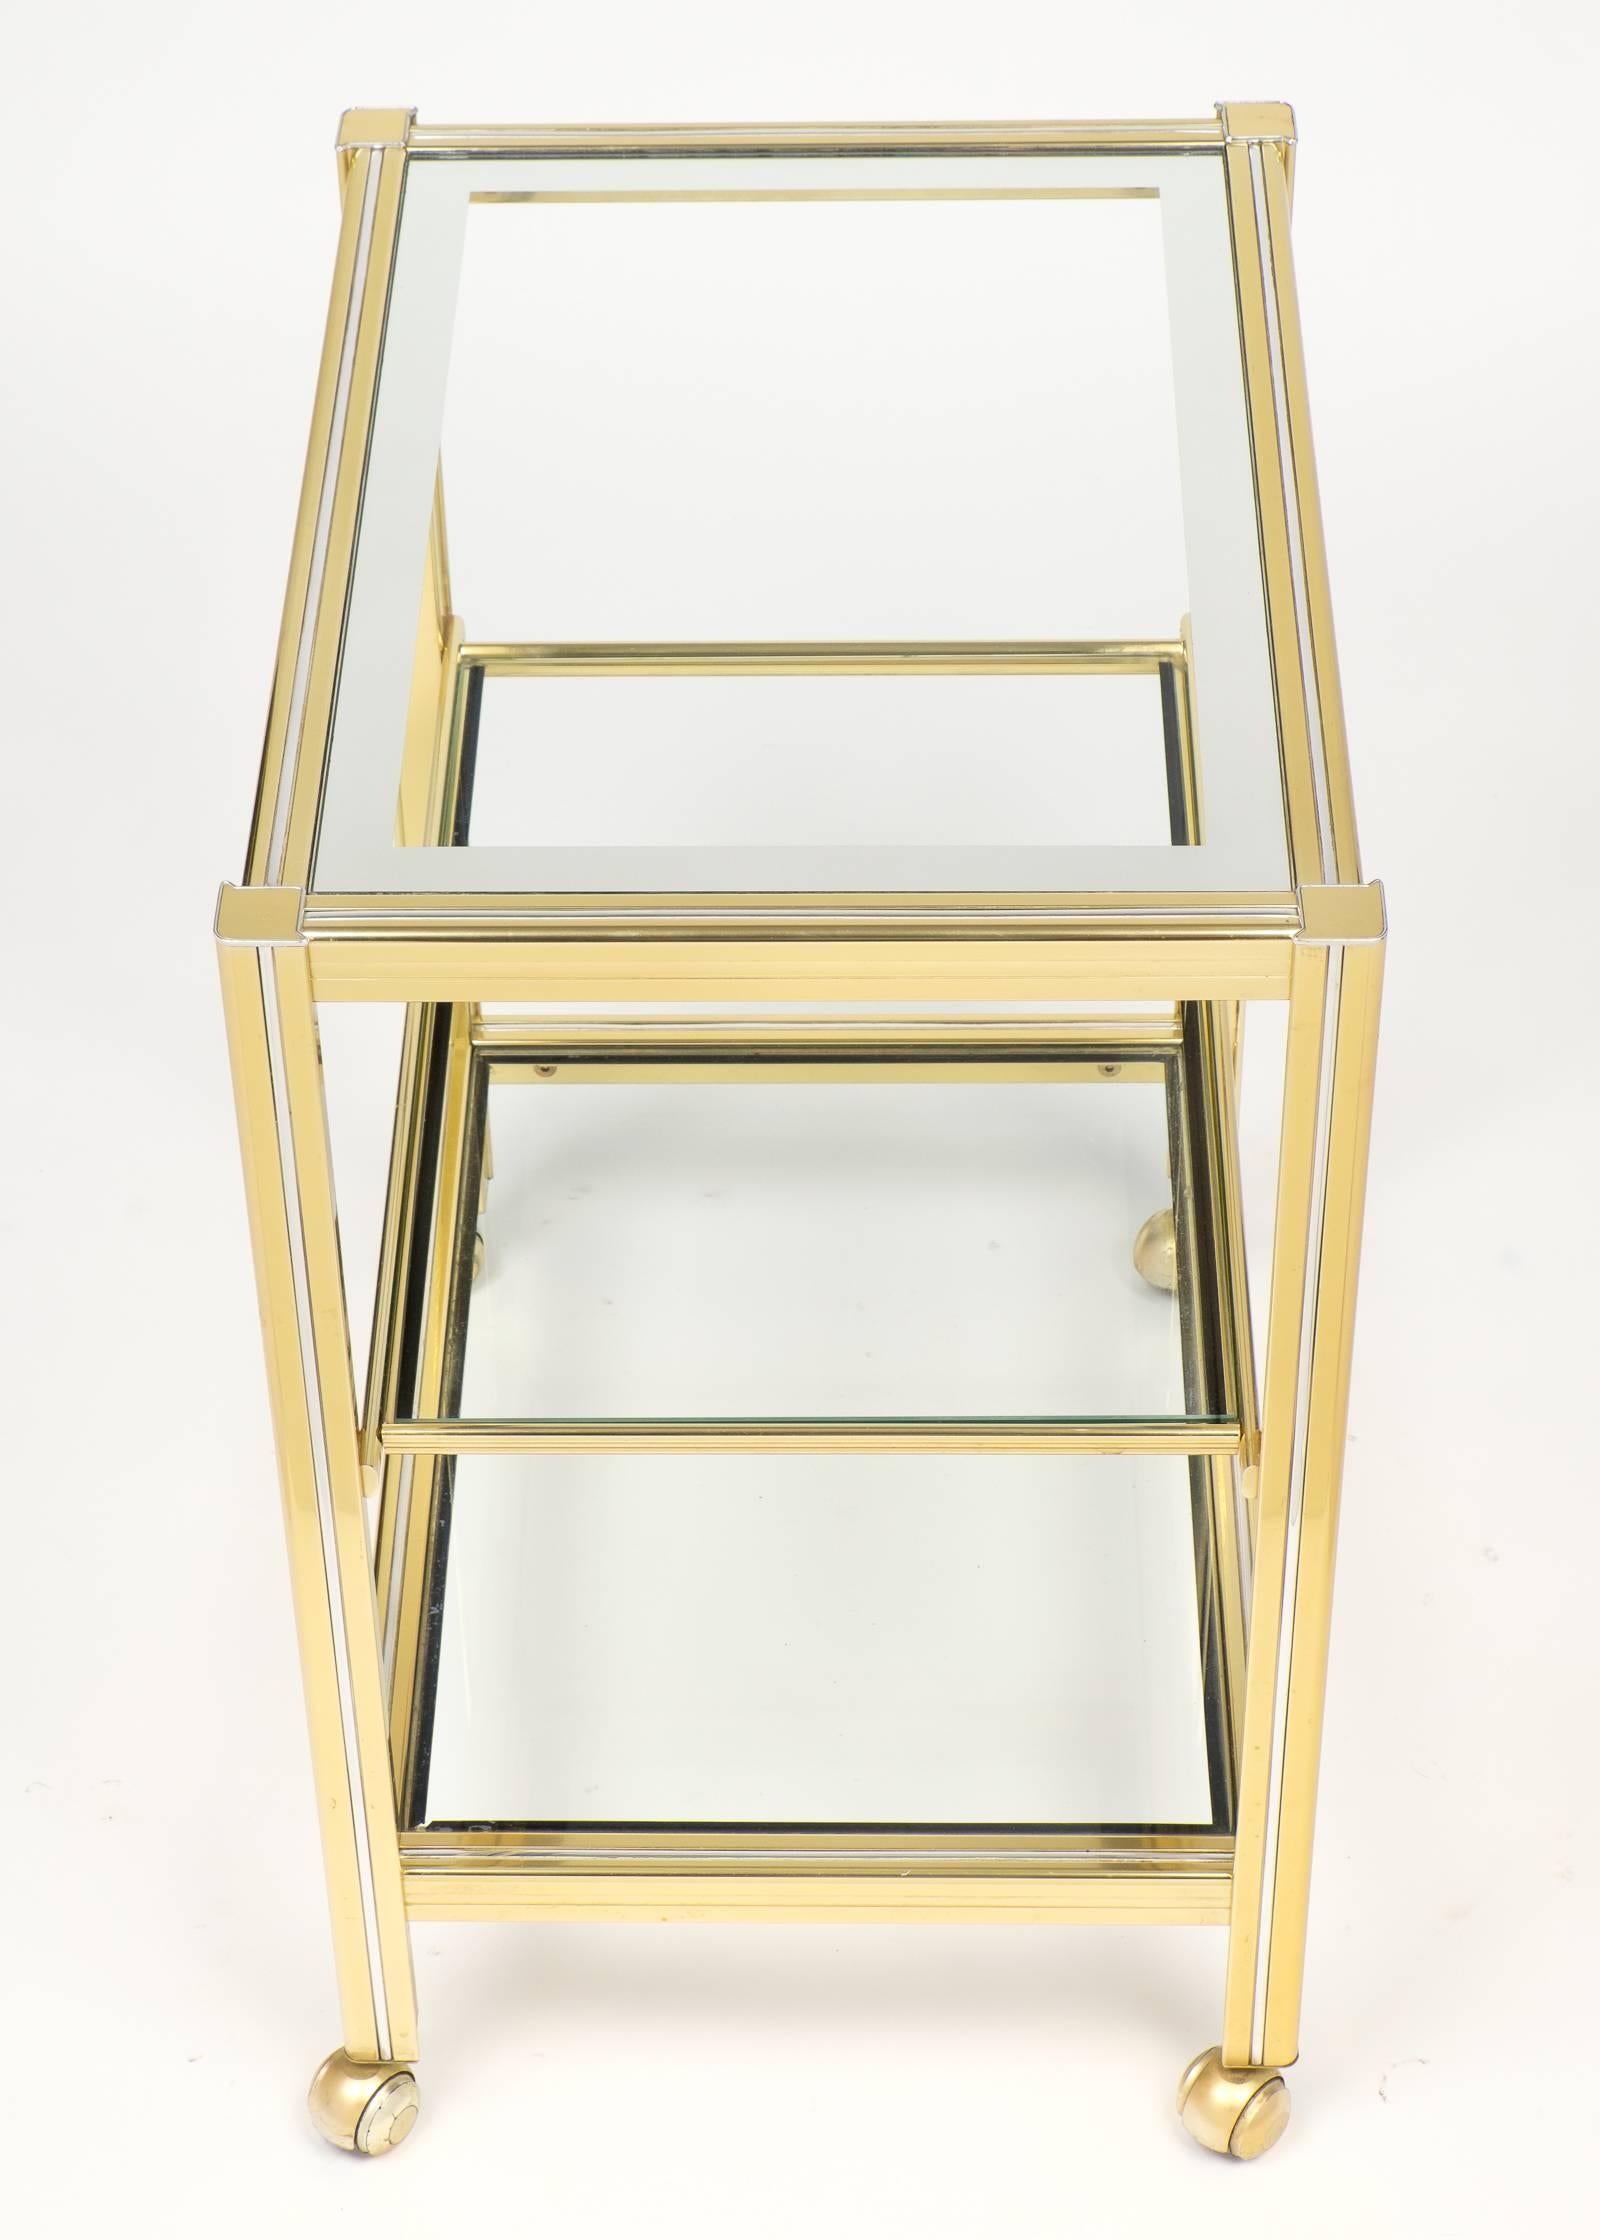 Mid-20th Century Vintage French Brass and Chrome Side Table or Etagere